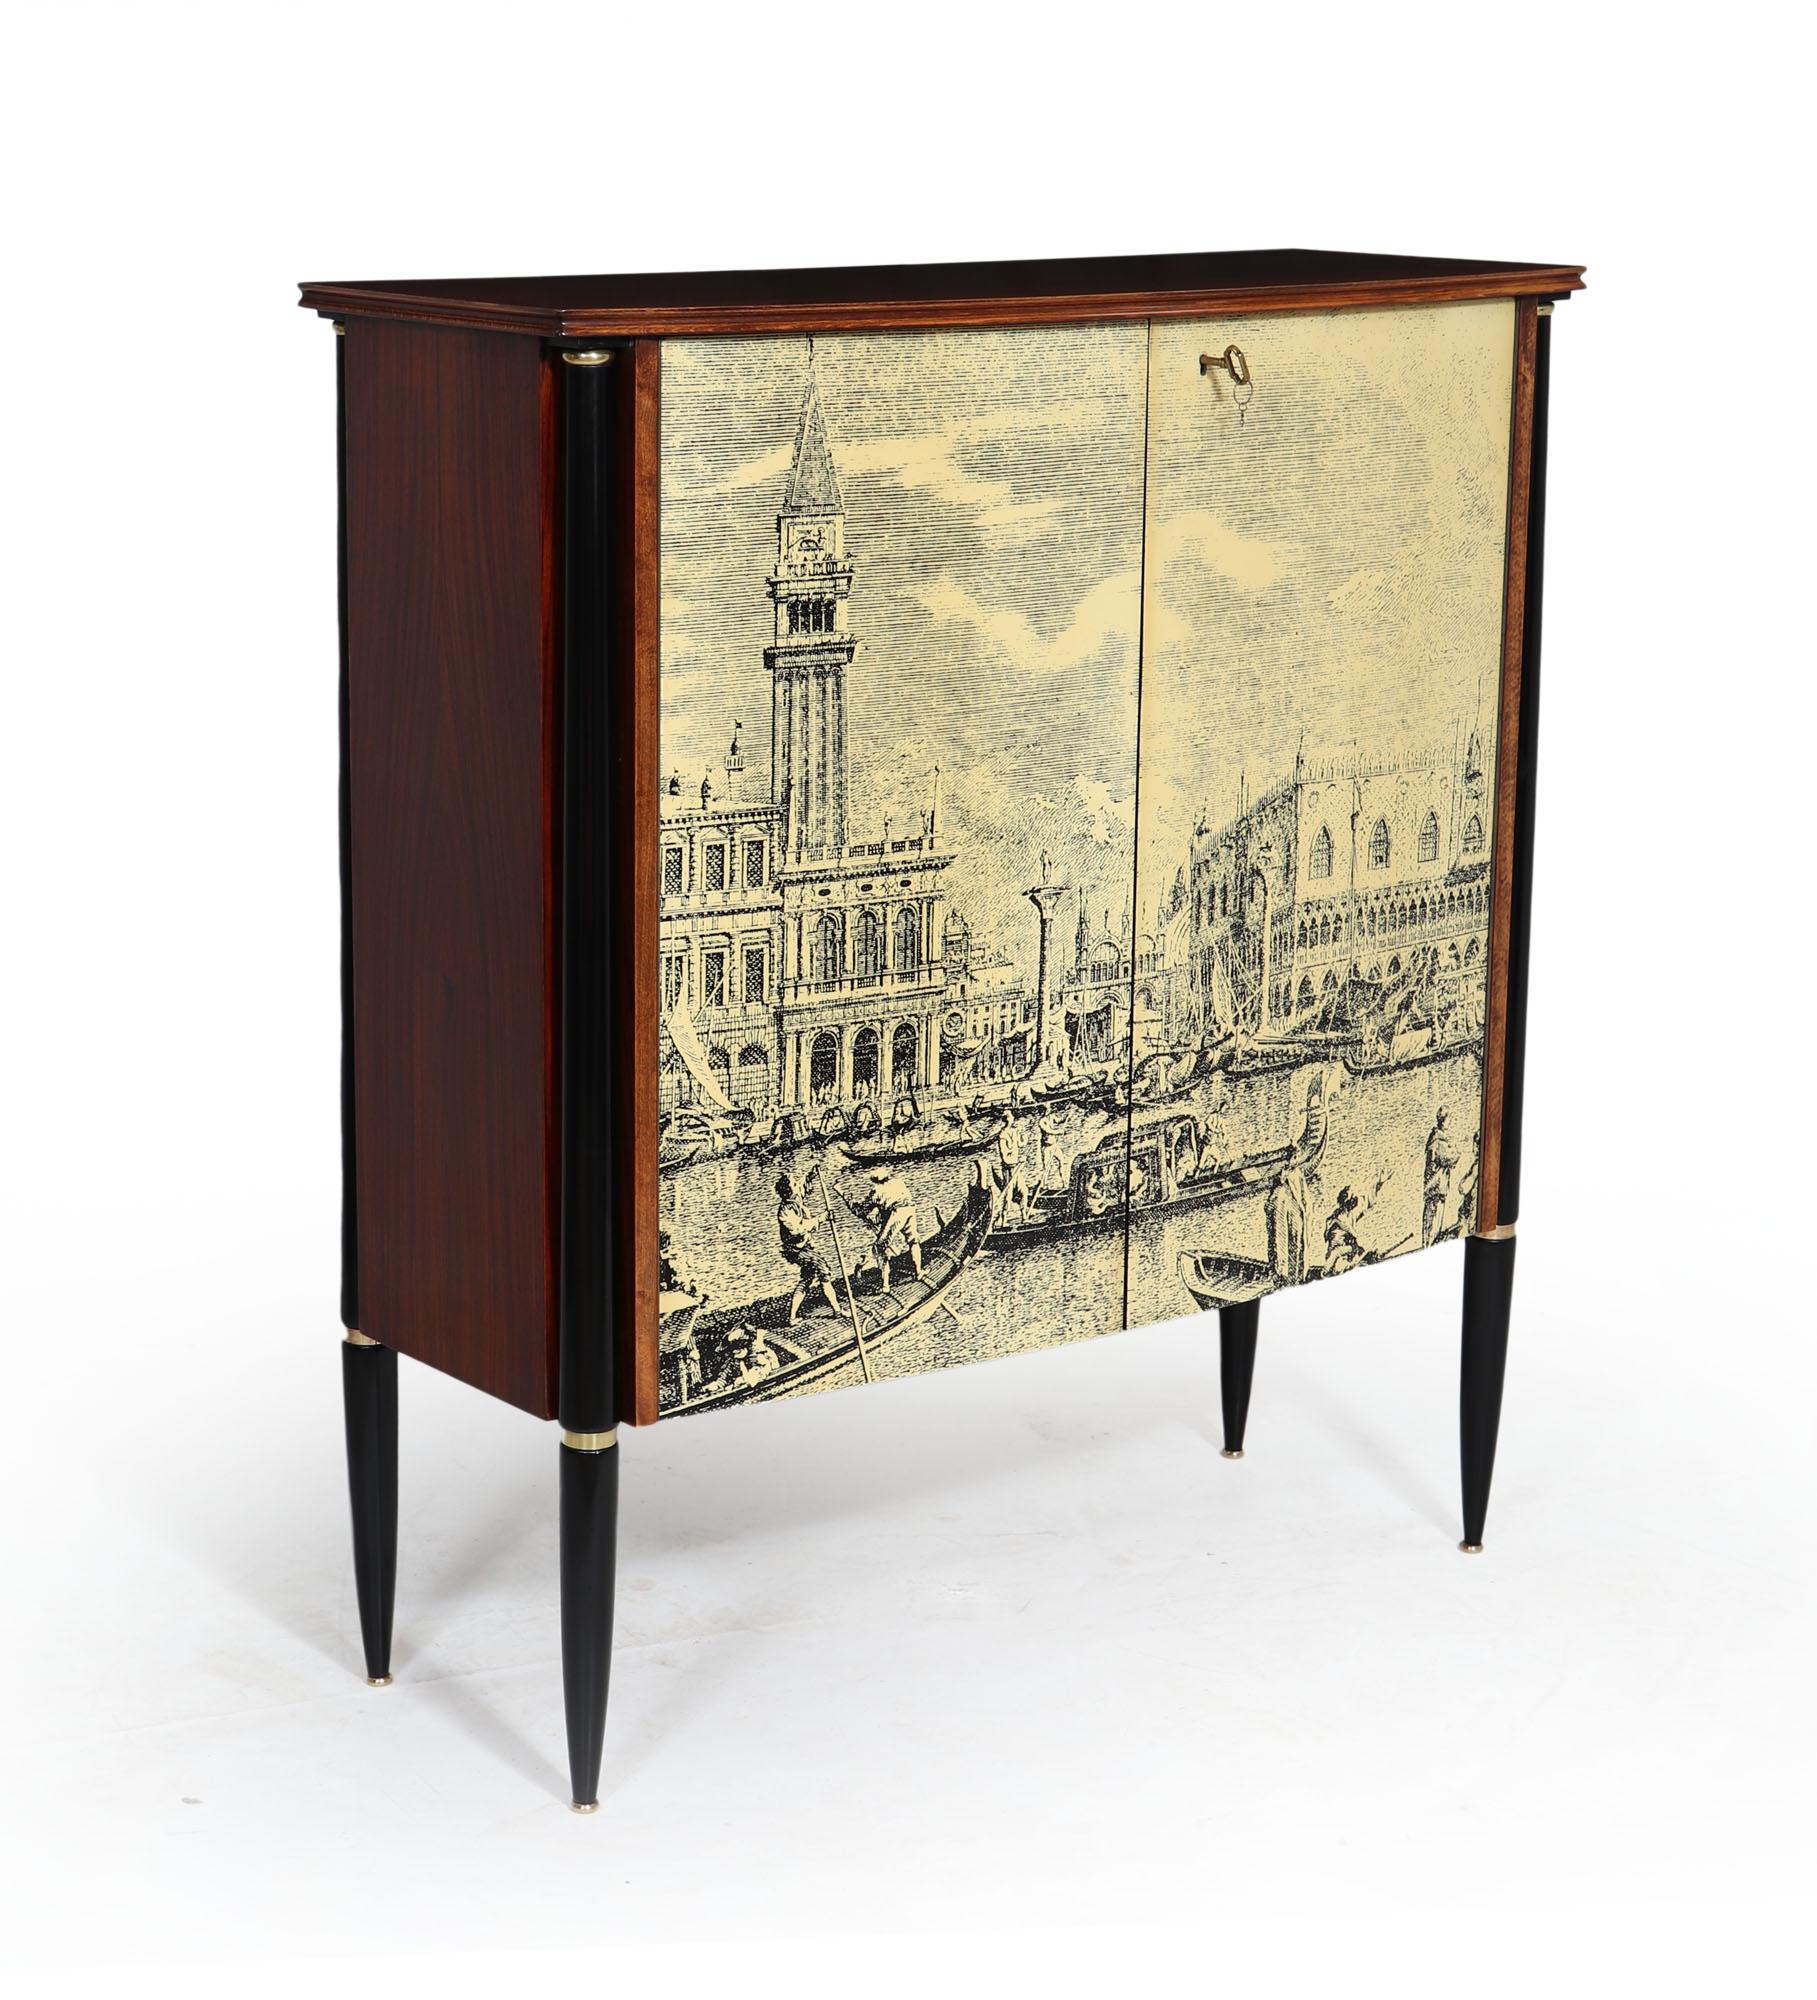 Italian Midcentury Cocktail Cabinet in the Manner of Fornasetti